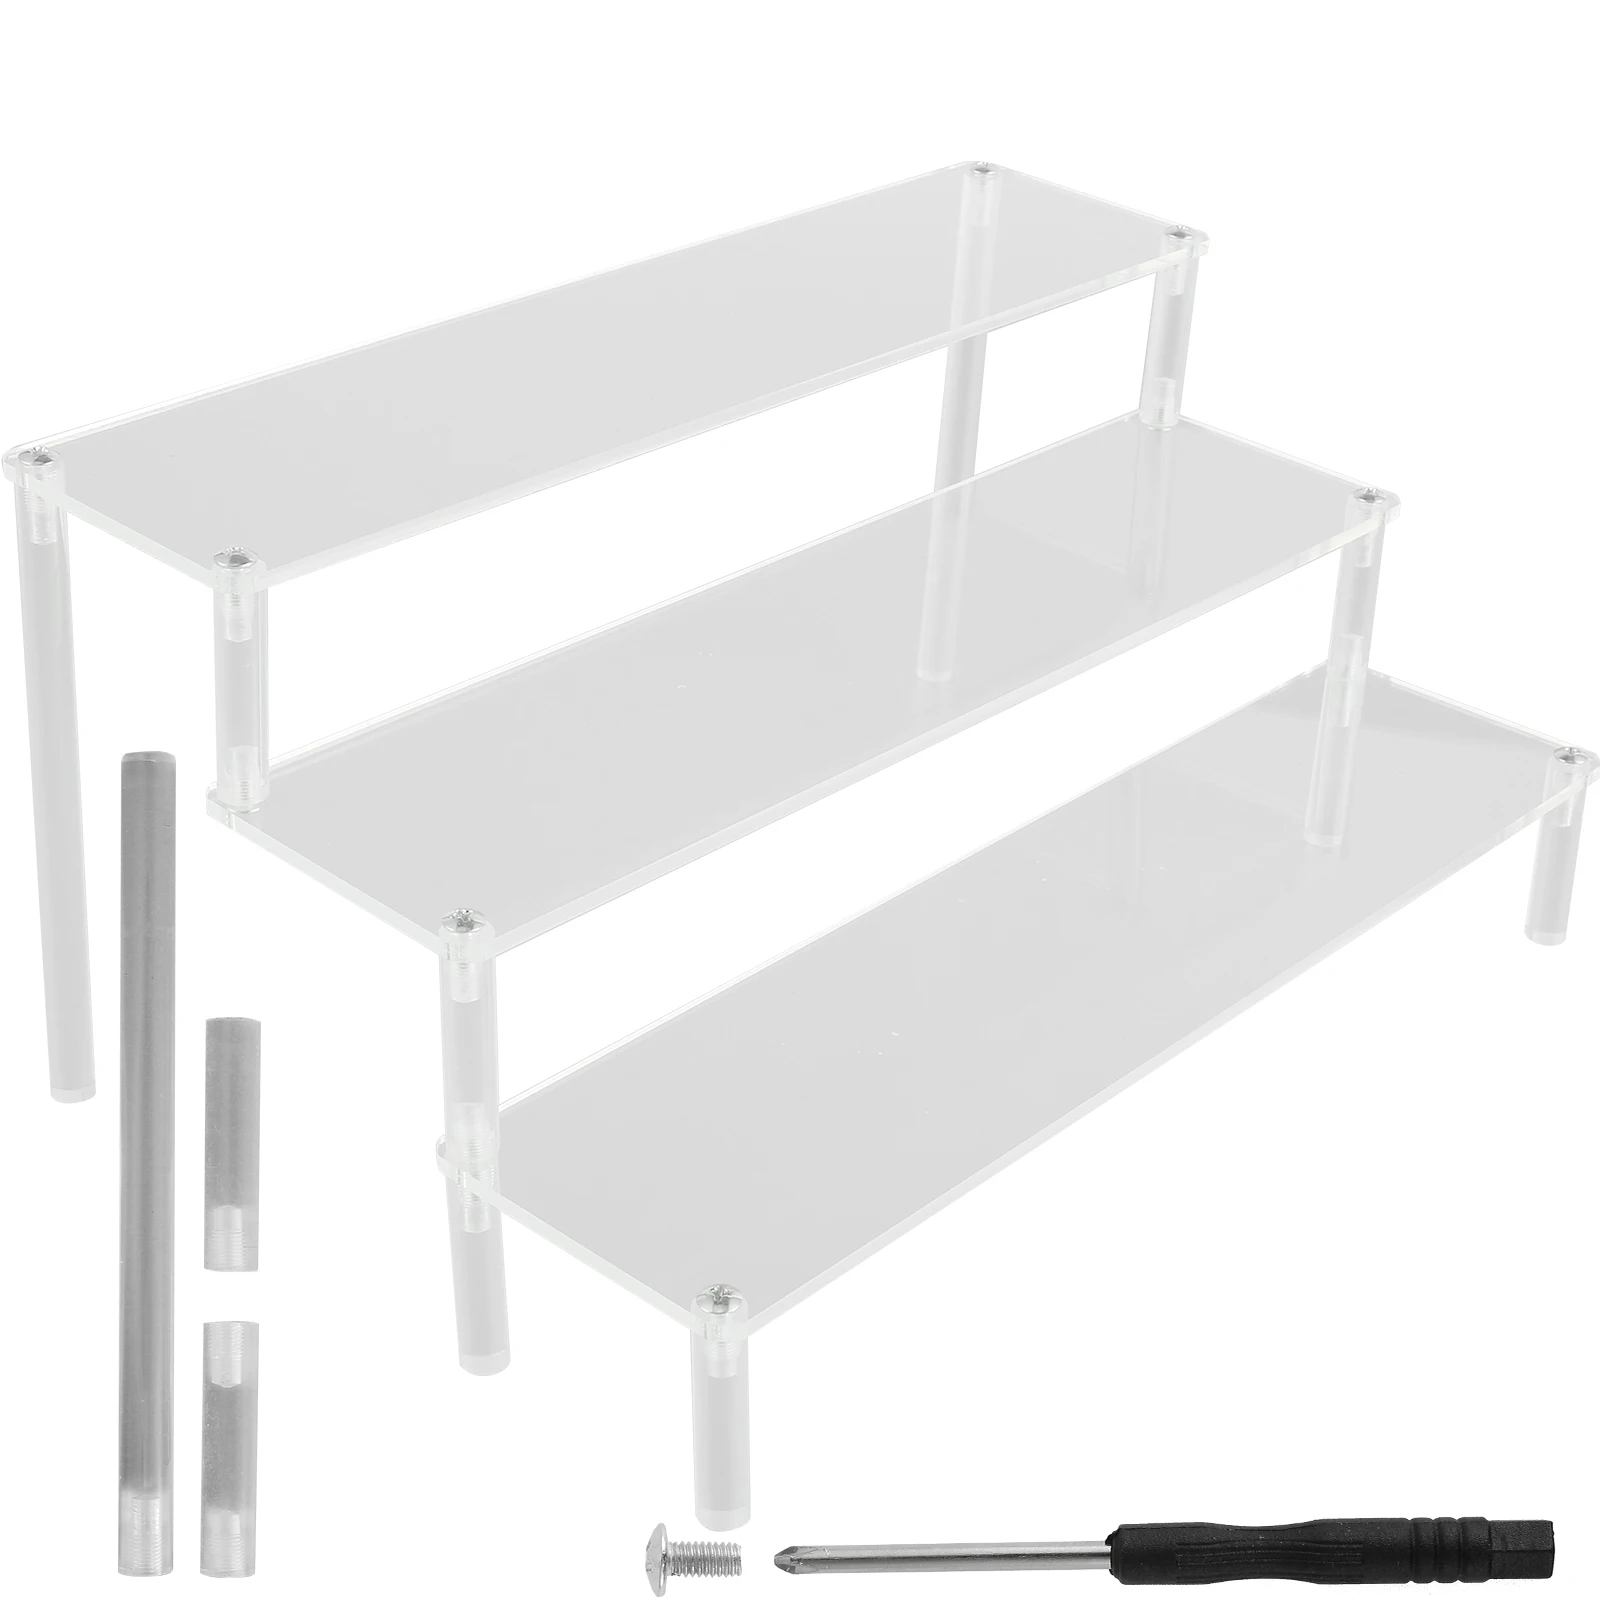 Acrylic Risers Display Stand 3 Tier Acrylic Tiered Shelf Clear Tiered Display Or - £54.87 GBP